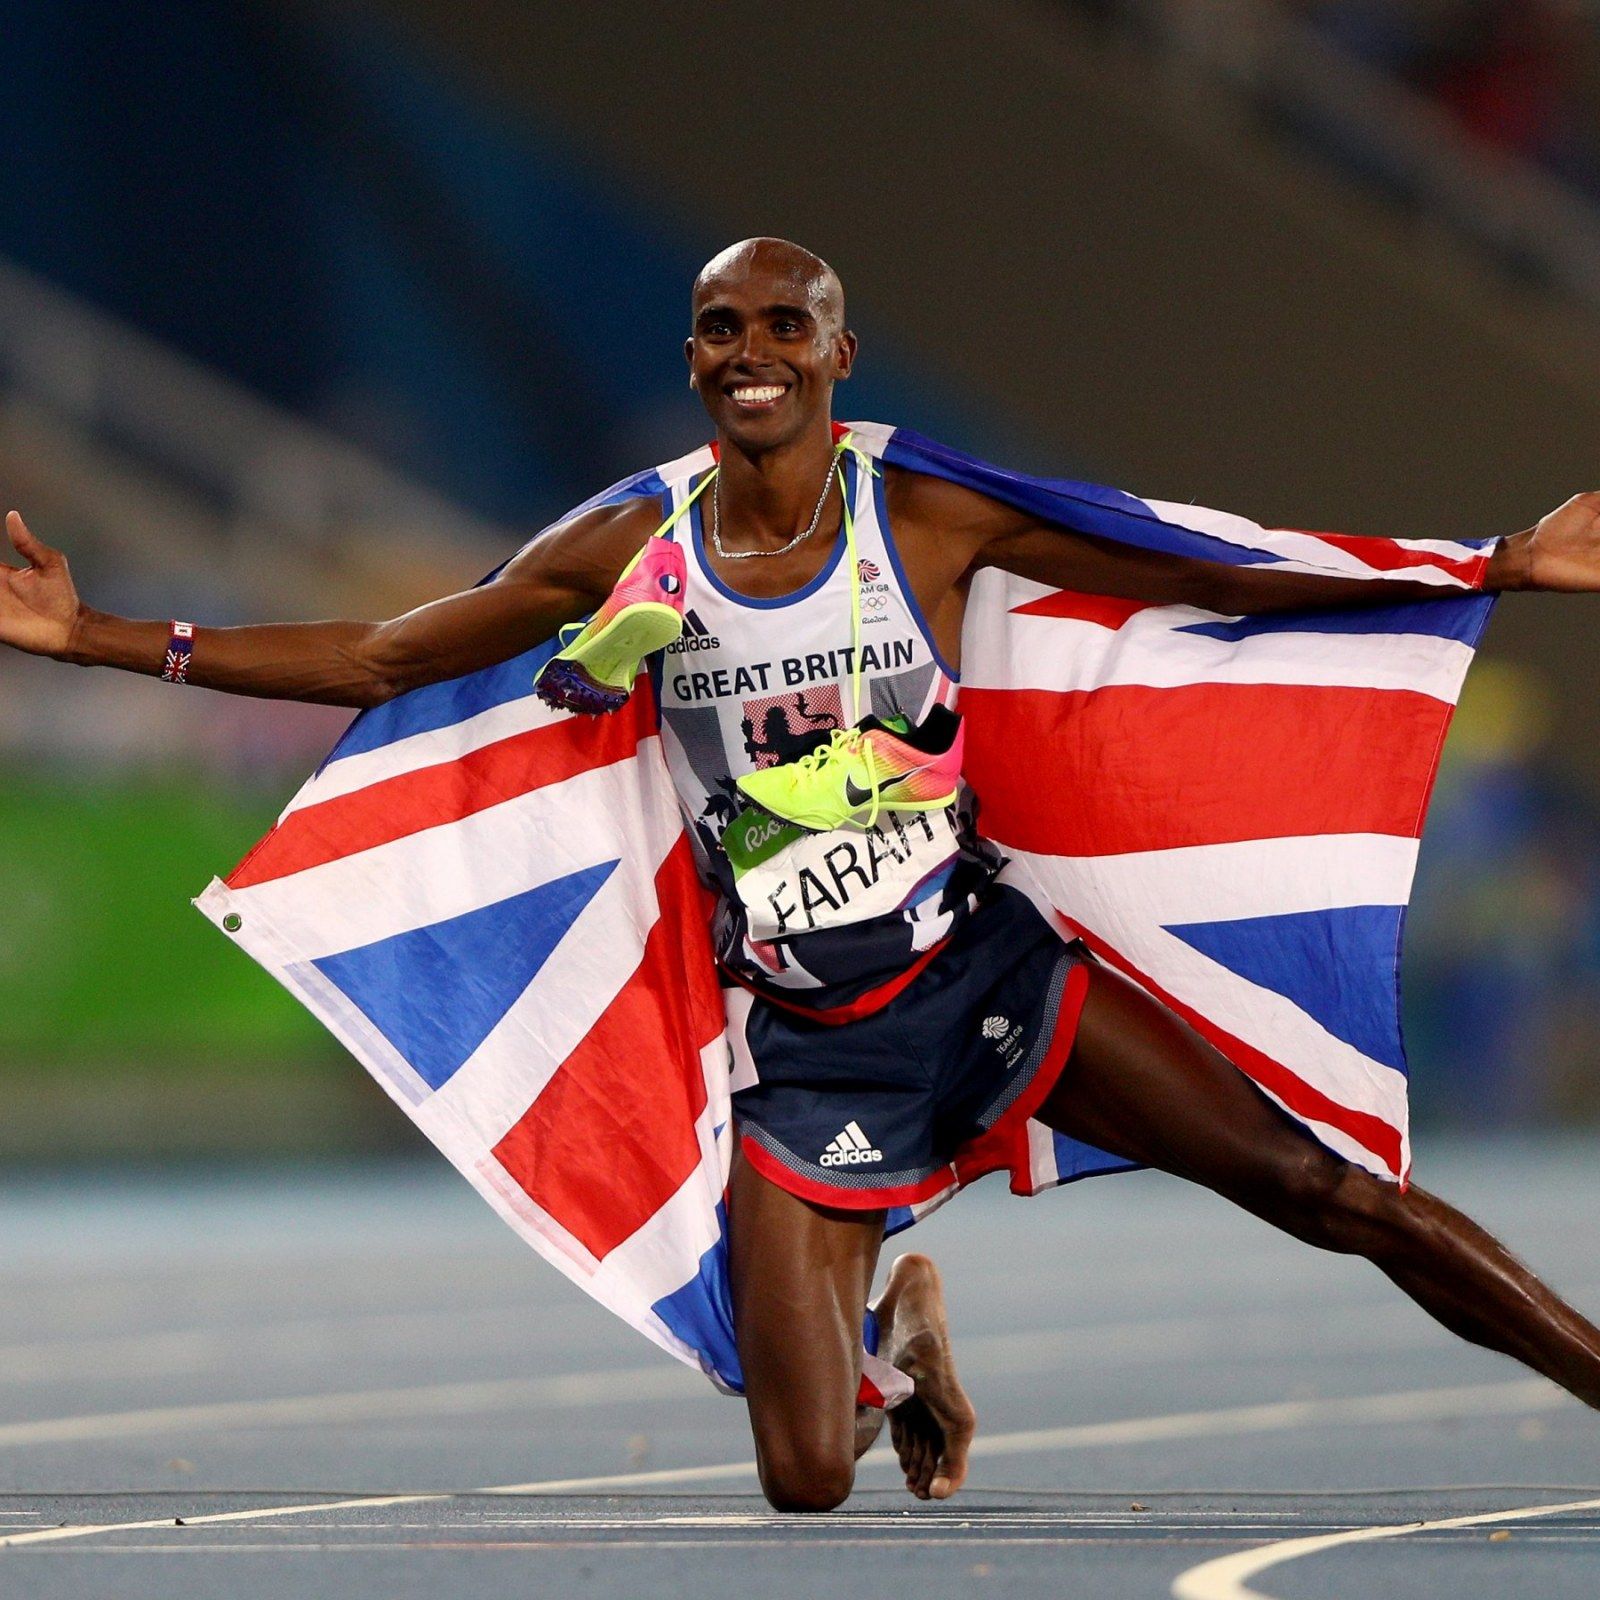 Mo Farah Tells Newsweek: Donald Trump Could Force Me Back to Britain